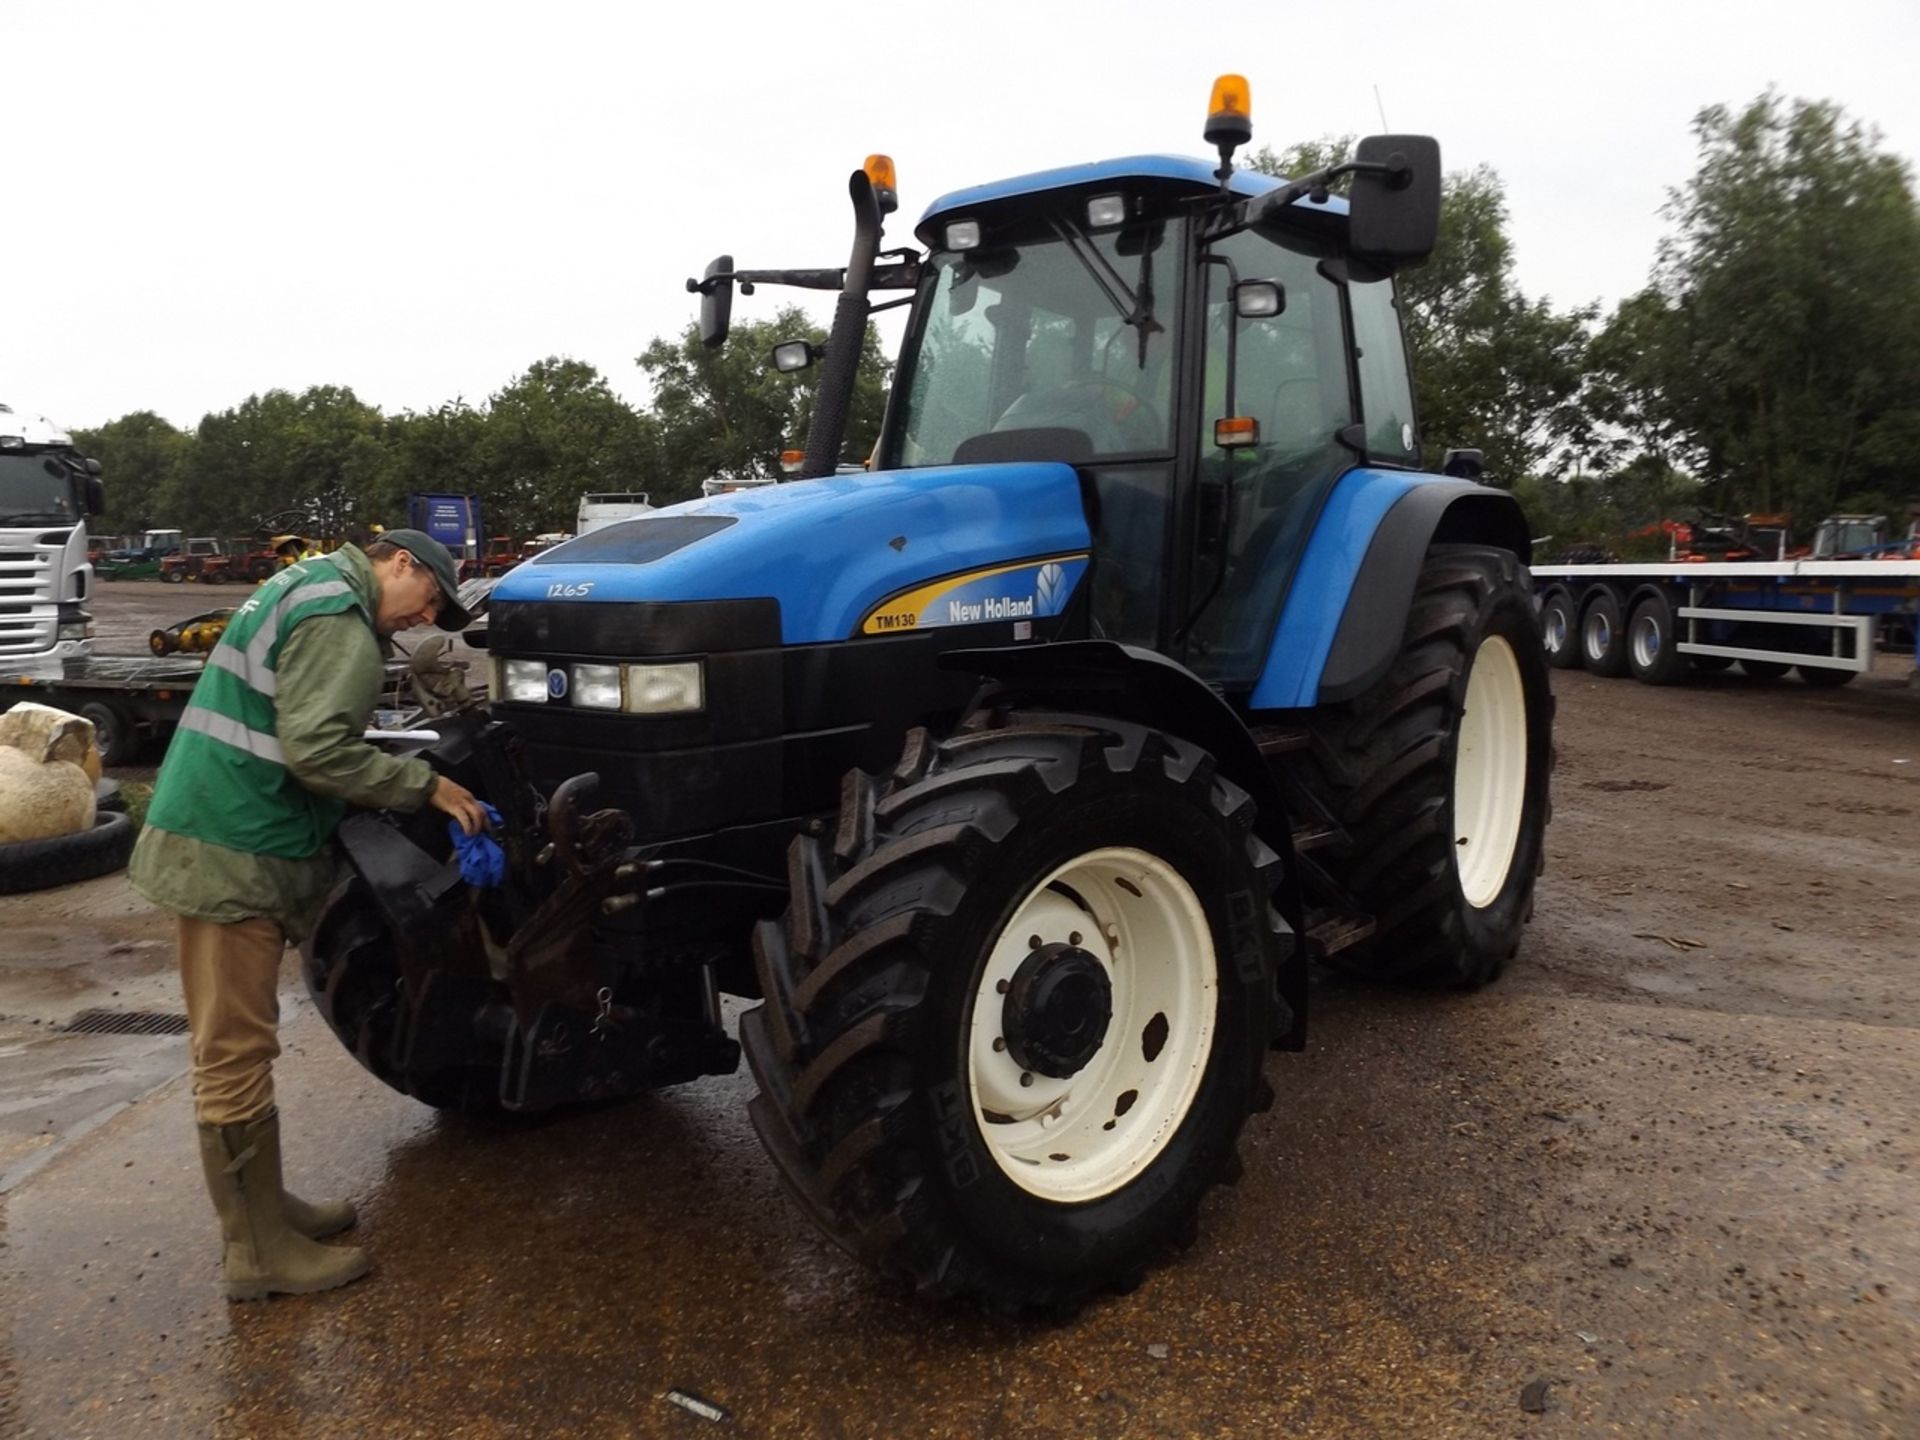 New Holland TM130 Range Command Tractor with Air Brakes. V5 will be supplied. Reg.No. MX57 GUE